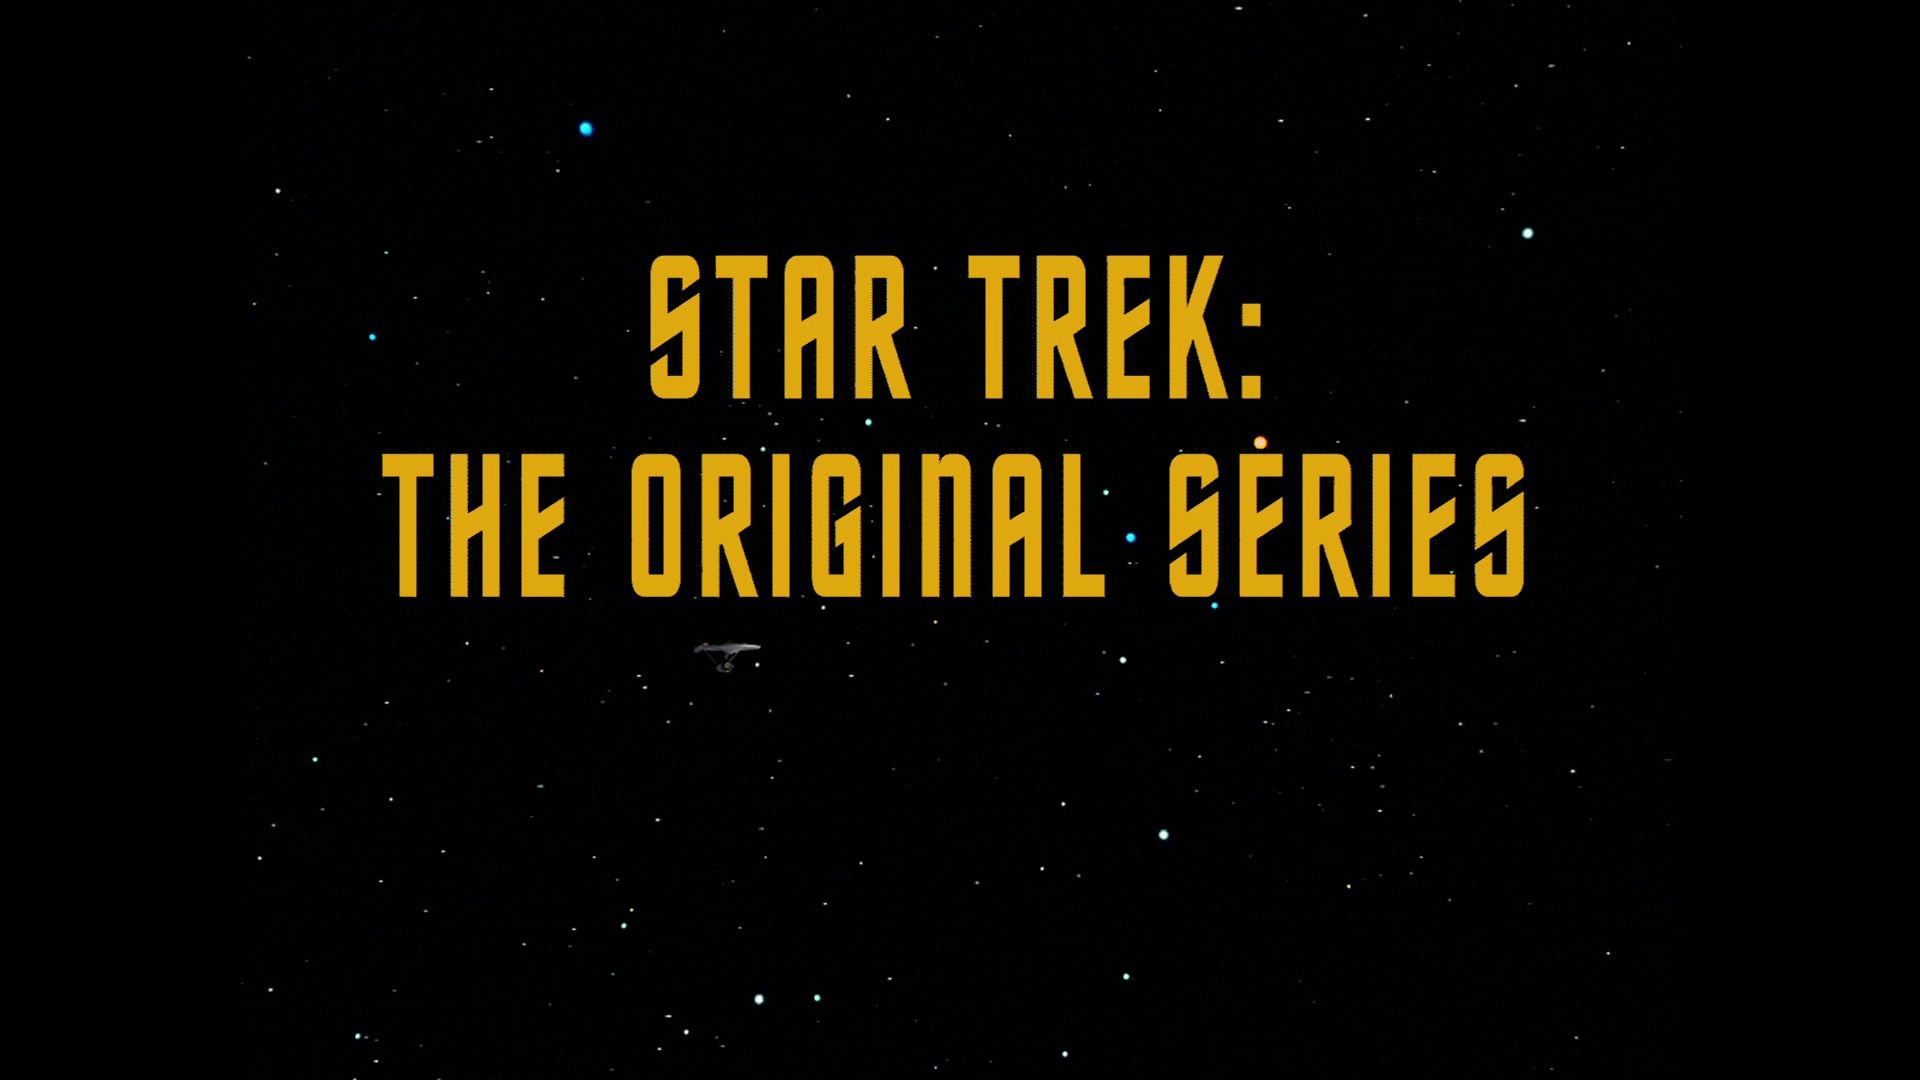 TOS Series Wrap Up – Revisited!